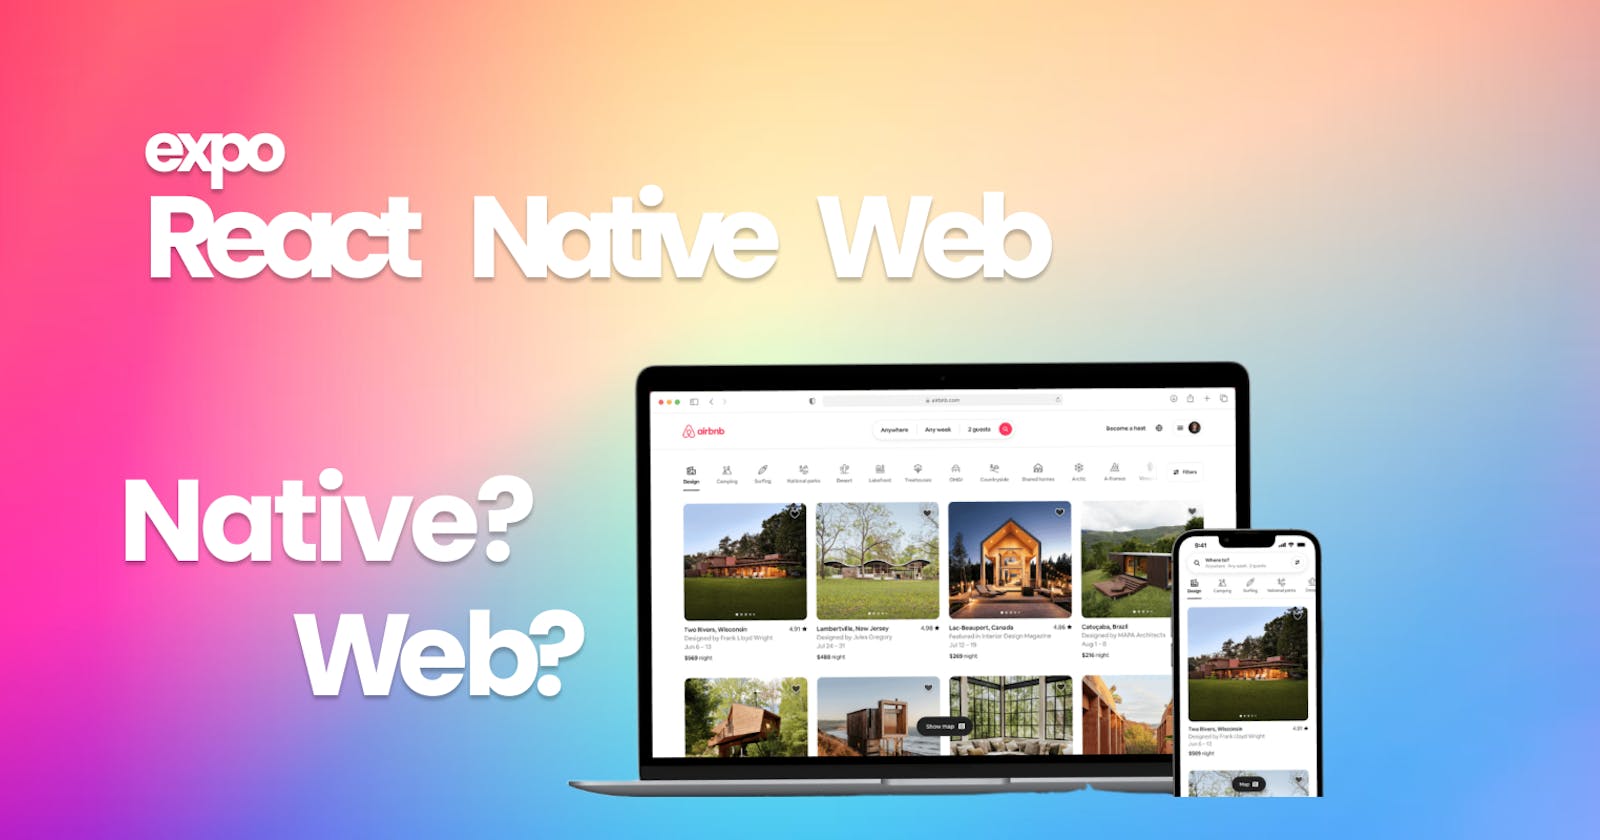 Is This Native or Web? React Native for Web Breaks the Boundaries